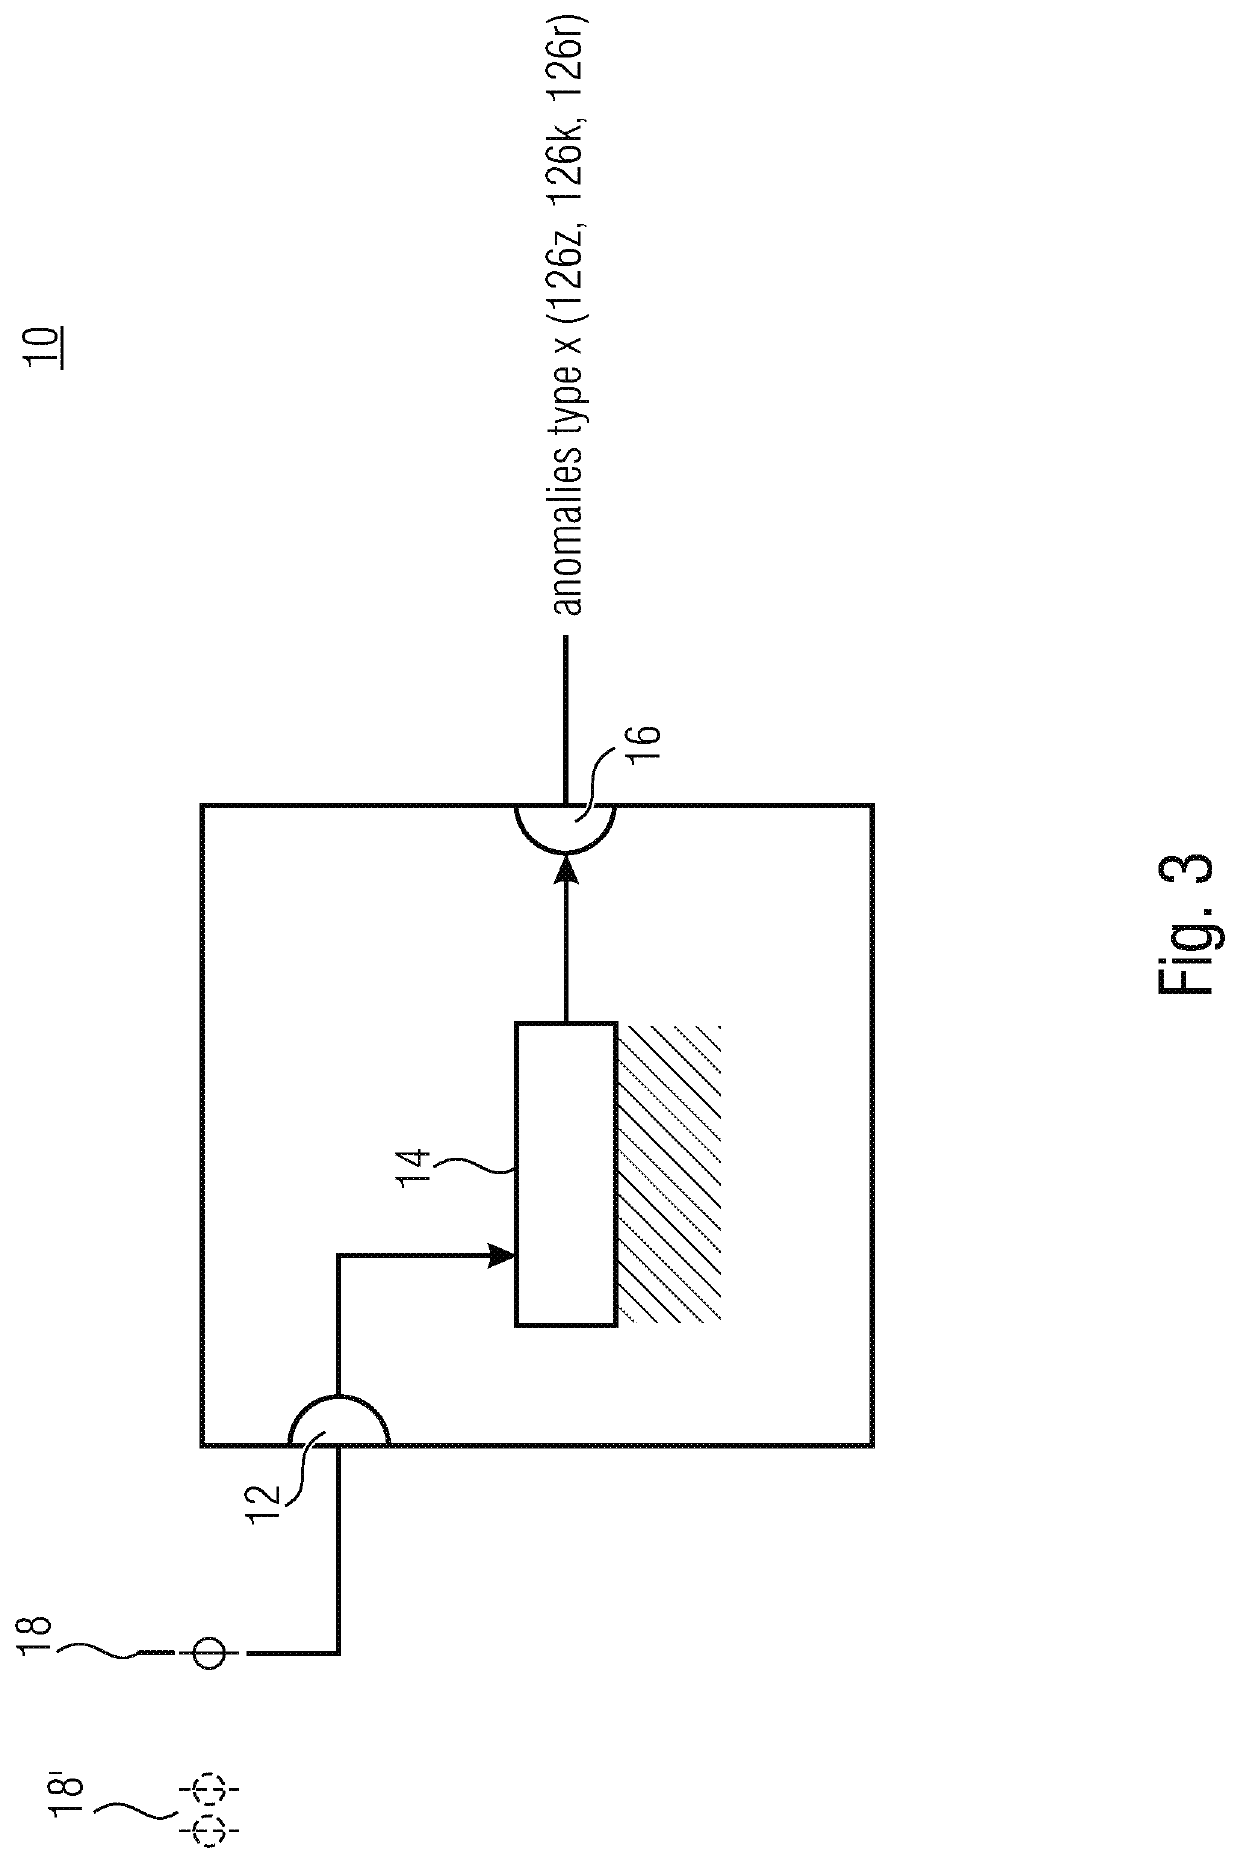 Method and apparatus for recognizing acoustic anomalies